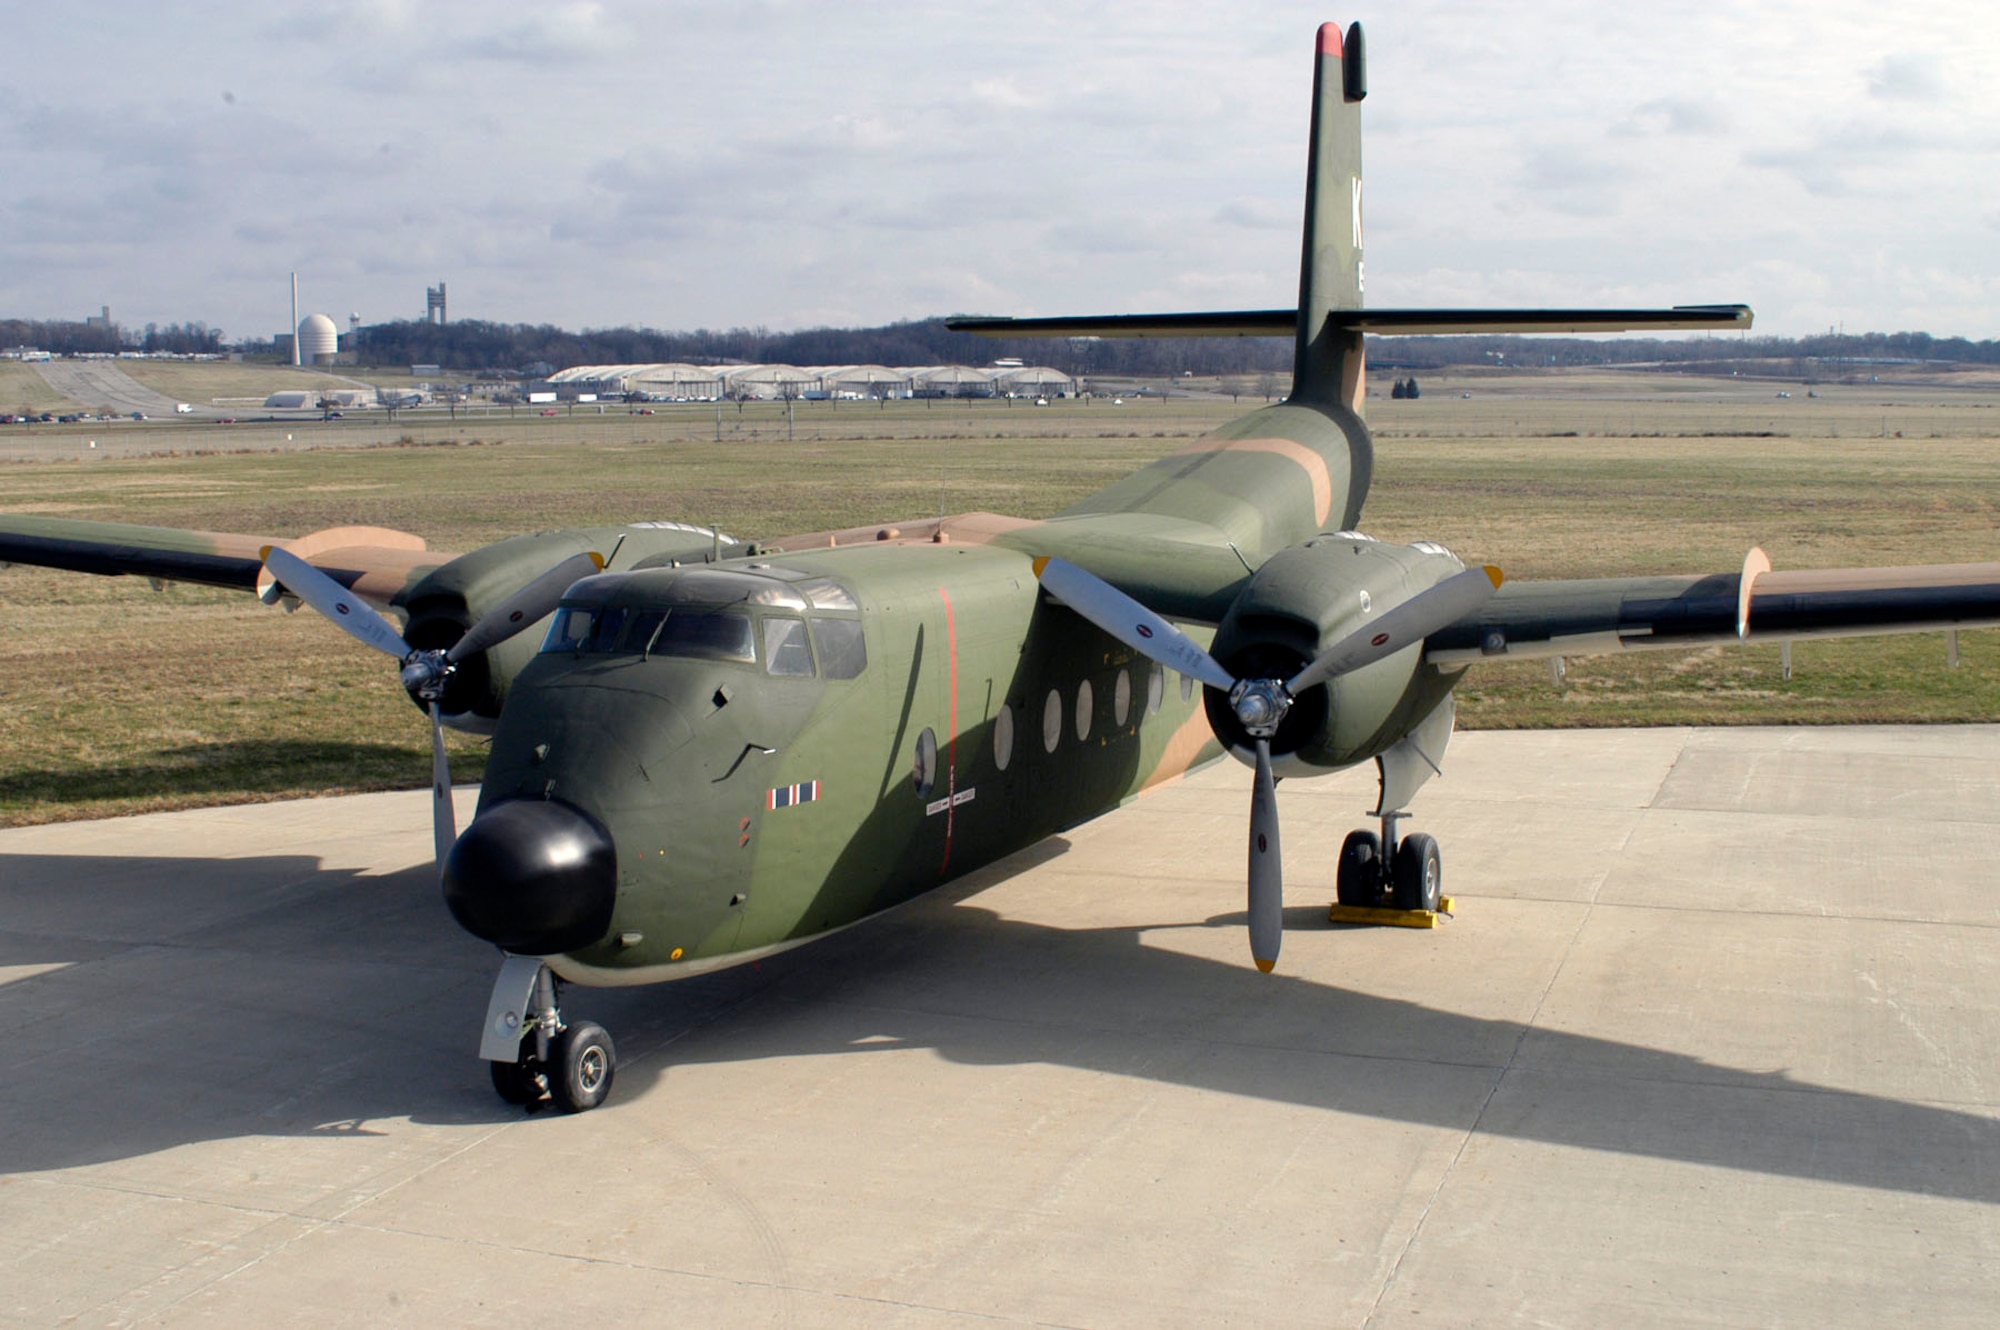 DAYTON, Ohio -- De Havilland C-7A Caribou at the National Museum of the United States Air Force. (U.S. Air Force photo)